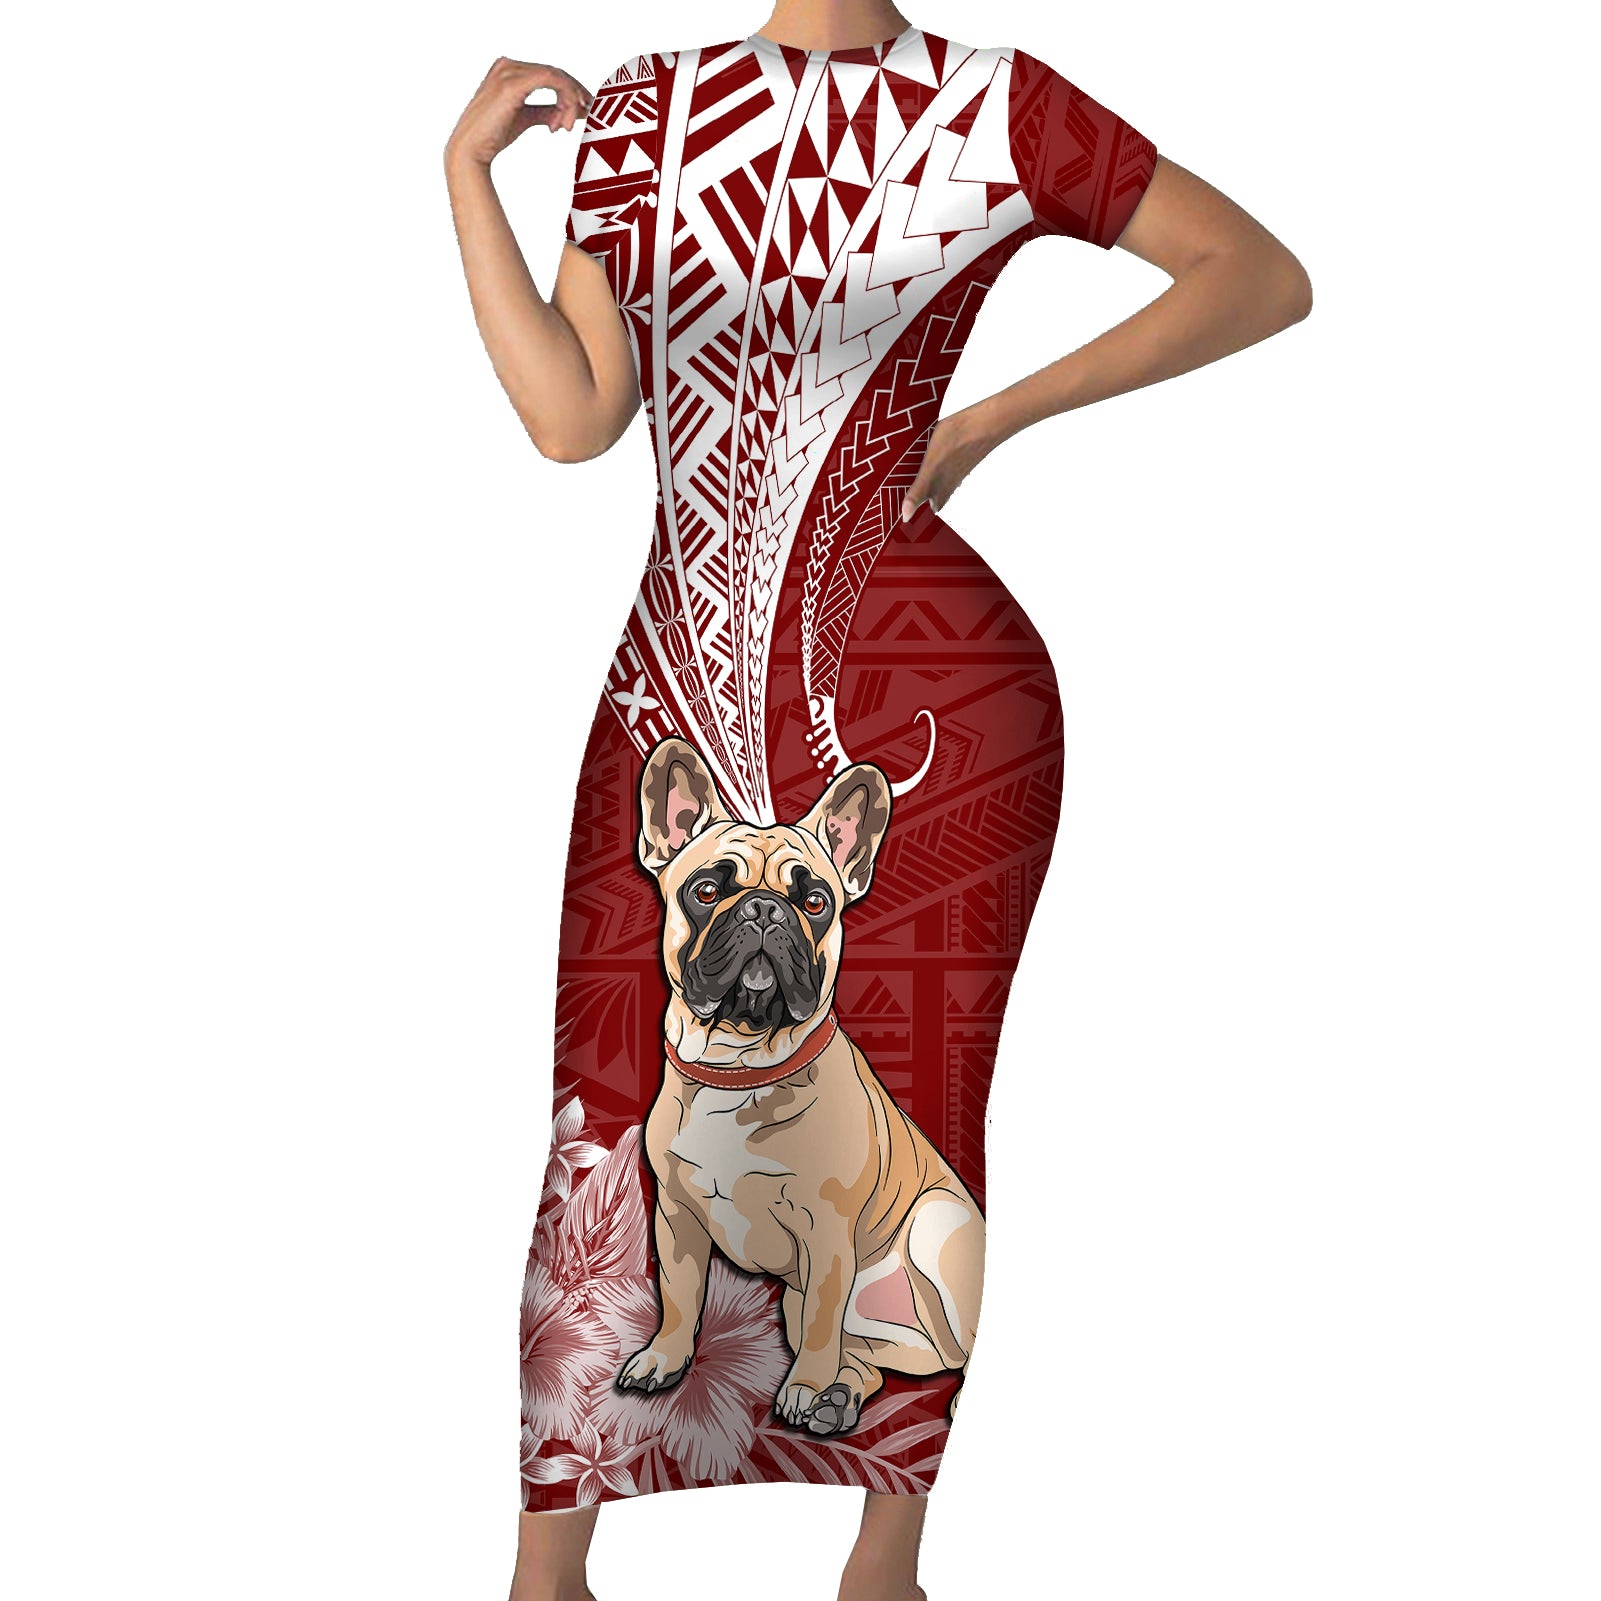 Personalised Polynesian Pacific Bulldog Short Sleeve Bodycon Dress With Red Hawaii Tribal Tattoo Patterns LT7 Long Dress Red - Polynesian Pride